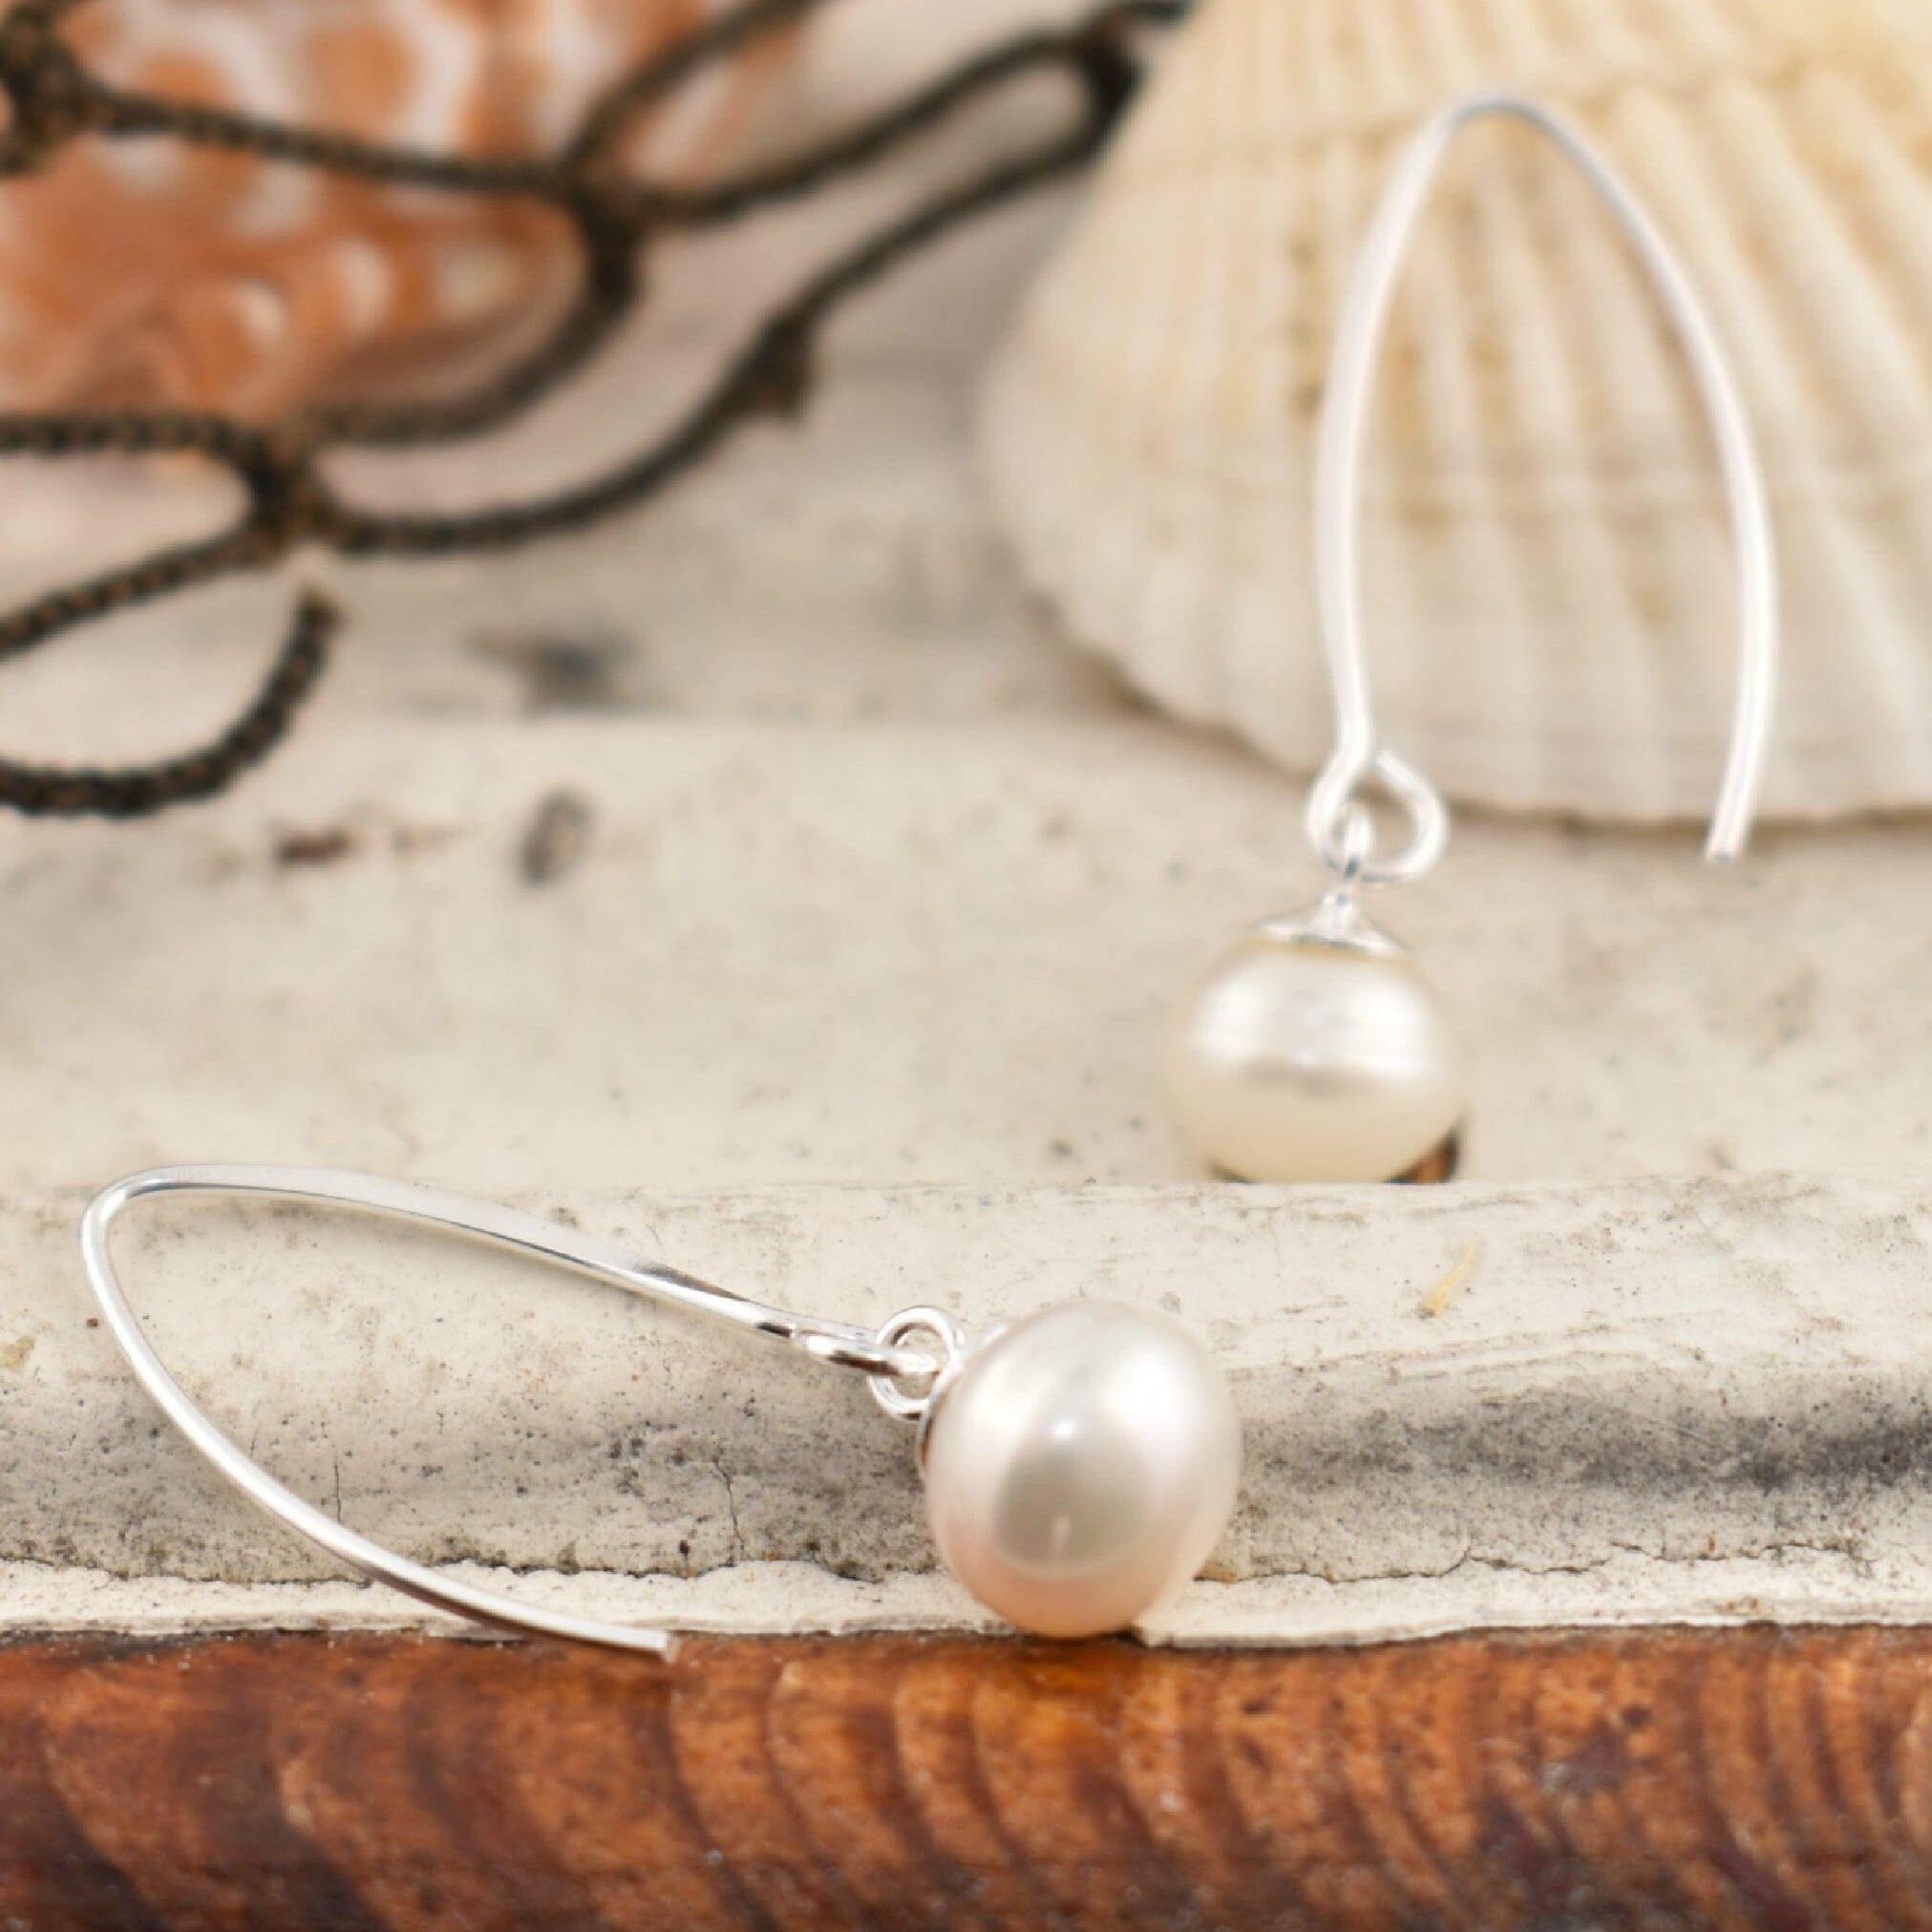 .925 sterling silver earrings featuring freshwater pearls